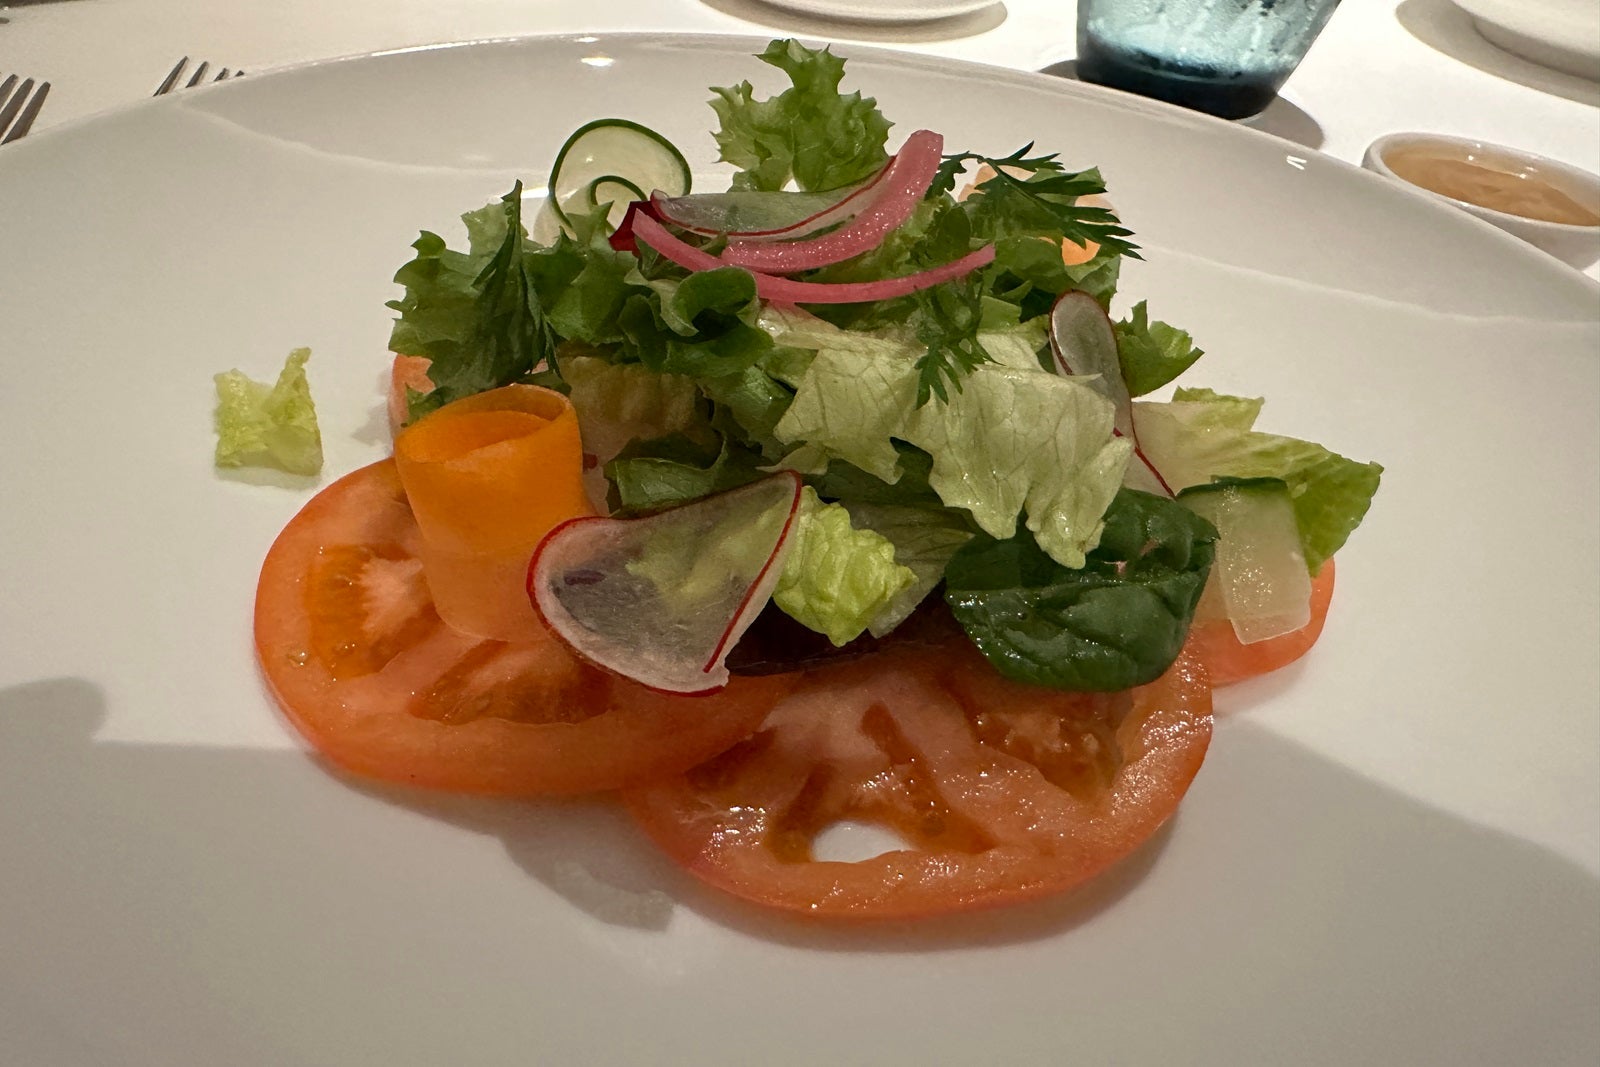 A salad with lettuce and tomatoes on a white plate